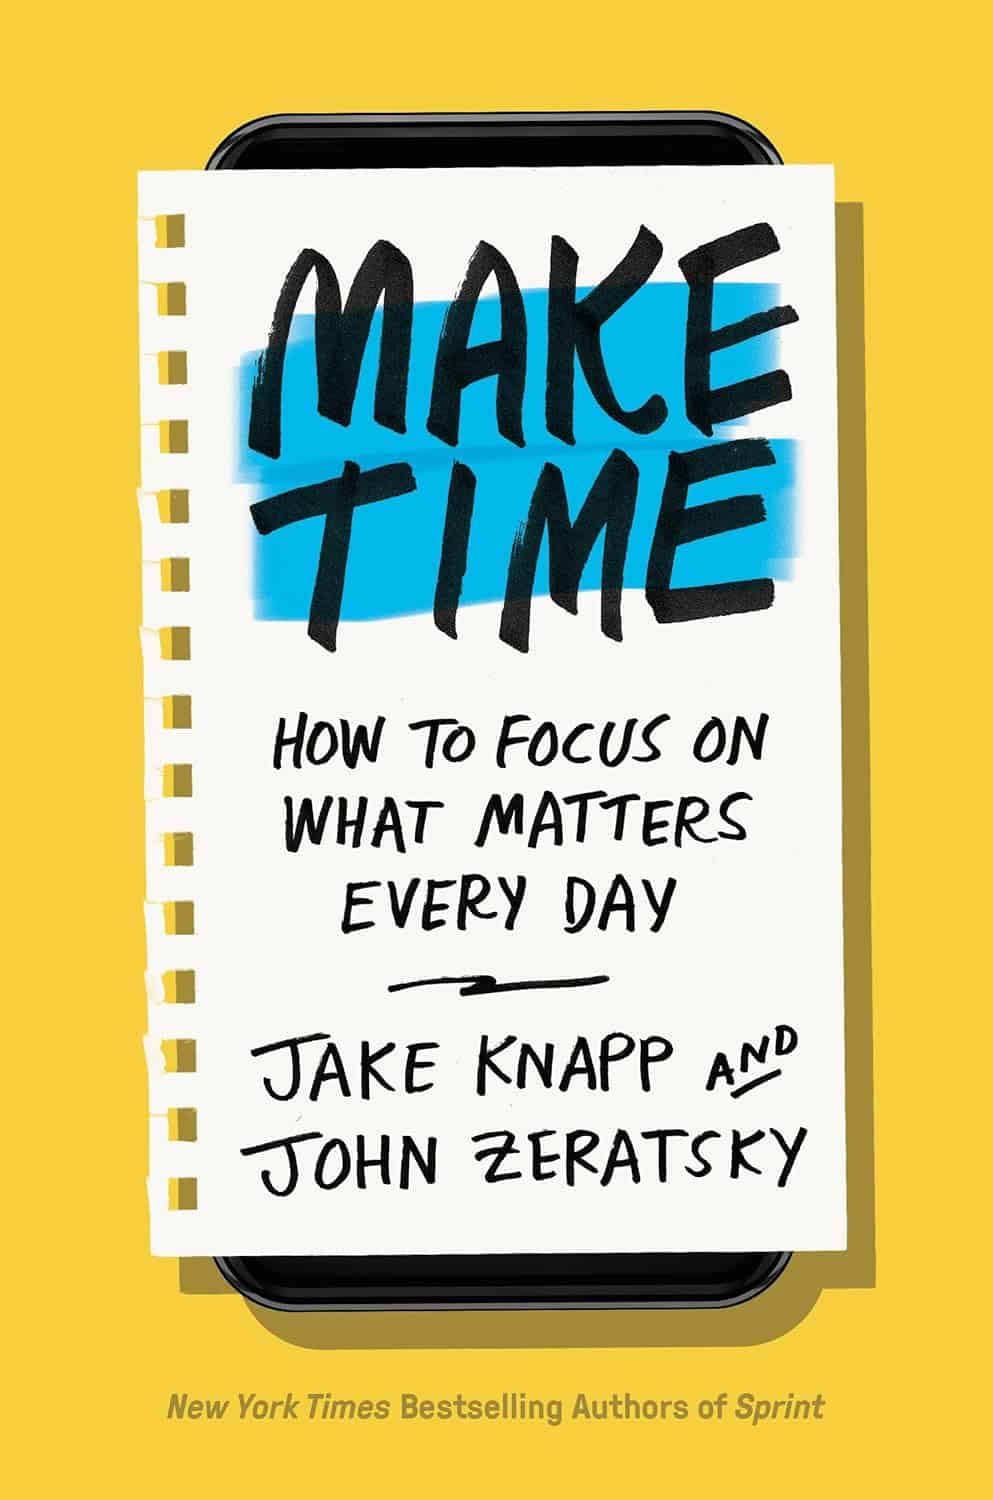 Make Time How to Focus on What Matters Every Day by Jake Zeratsky and John Knapp